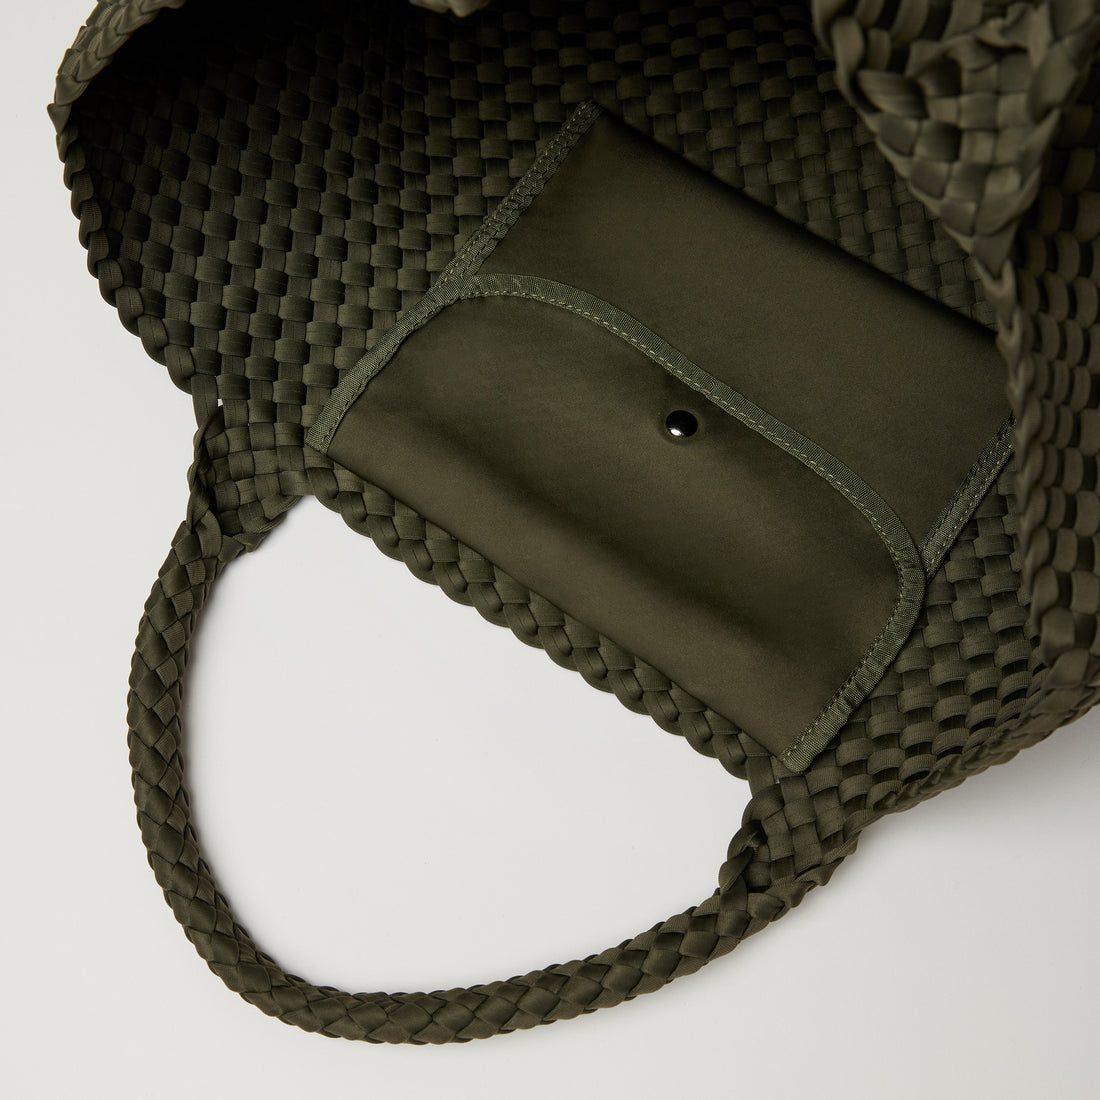 Andreina Bags Siempre tote bag in army green colour. Large size yet lightweight. Has an internal attached pocket that closes up. Handmade, interlaced material, synthetic material, water resistant, machine washable. Designed in Sydney, Australia.